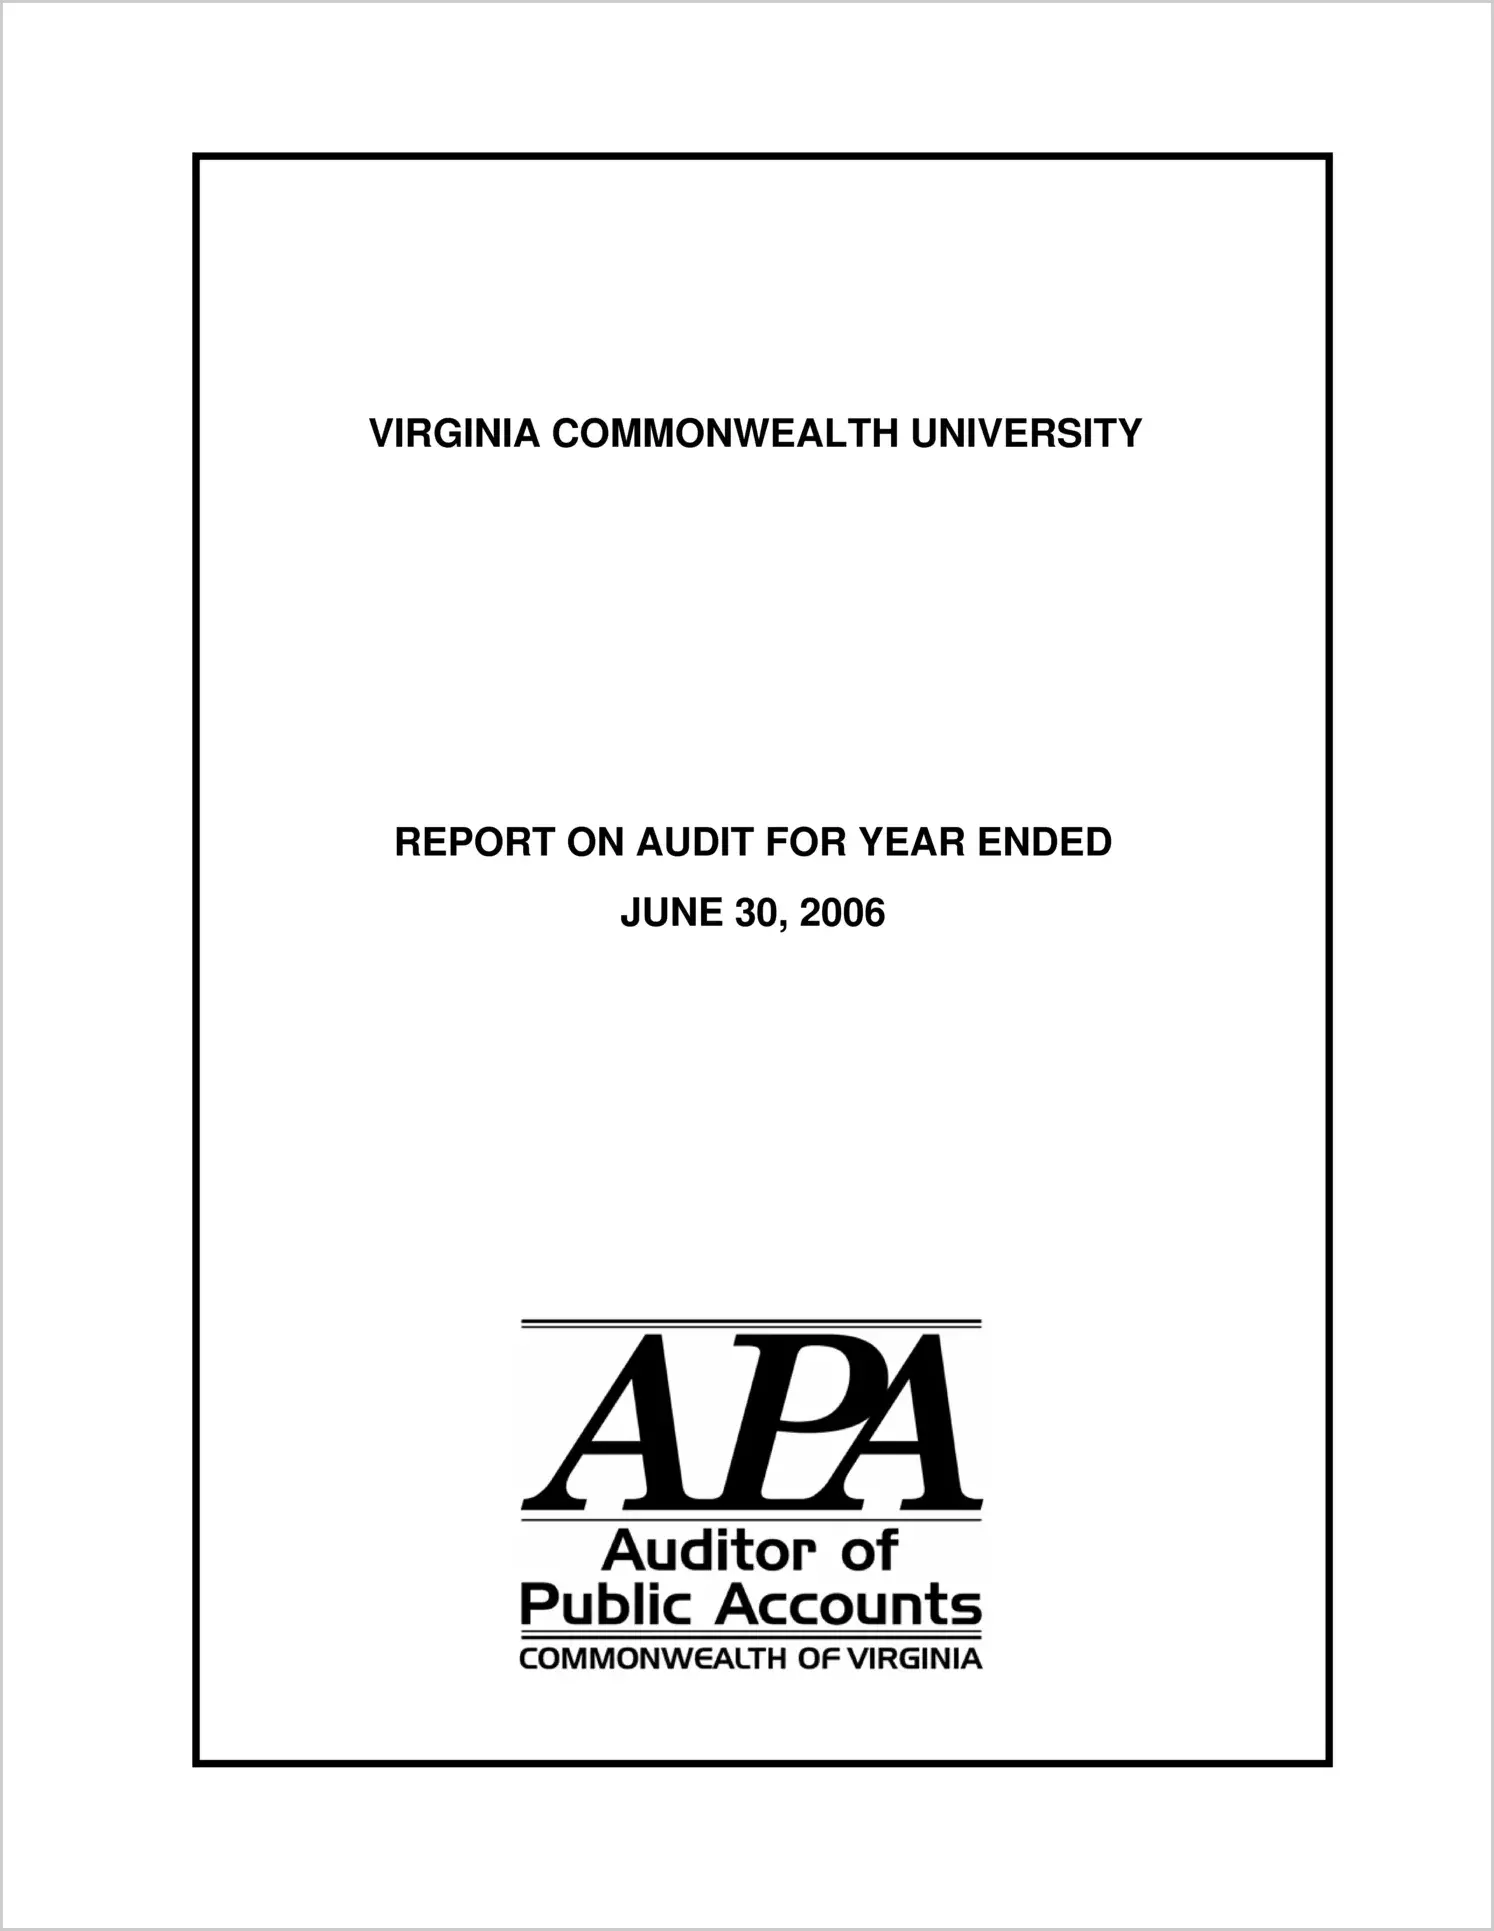 Virginia Commonwealth University for the year ended June 30, 2006